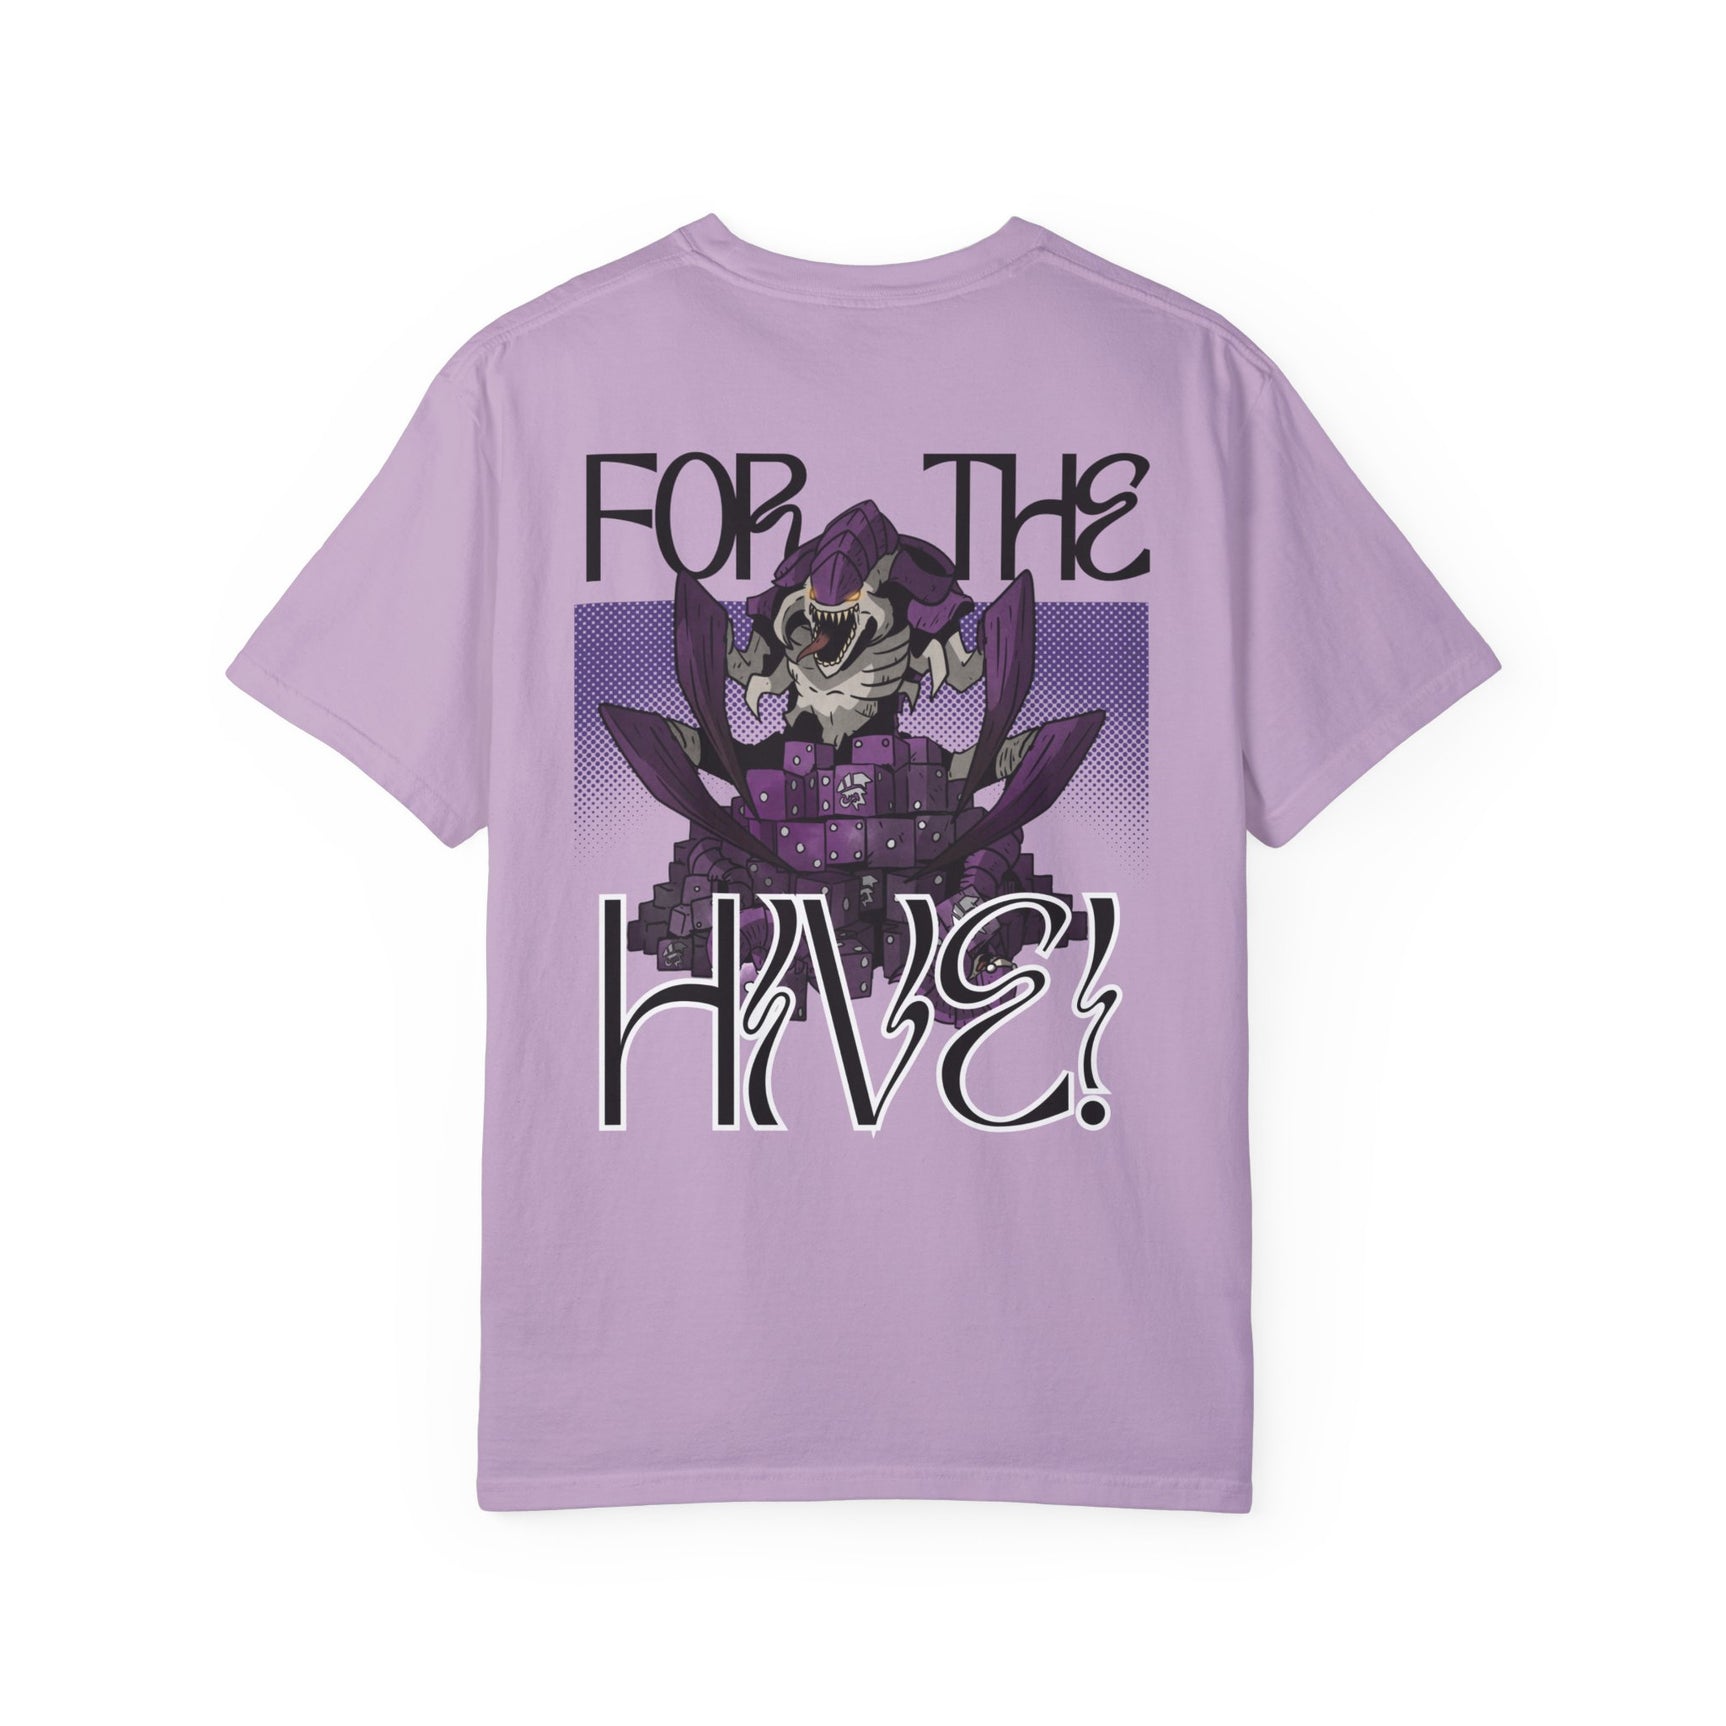 Space Bugs - For the Hive! T-shirt